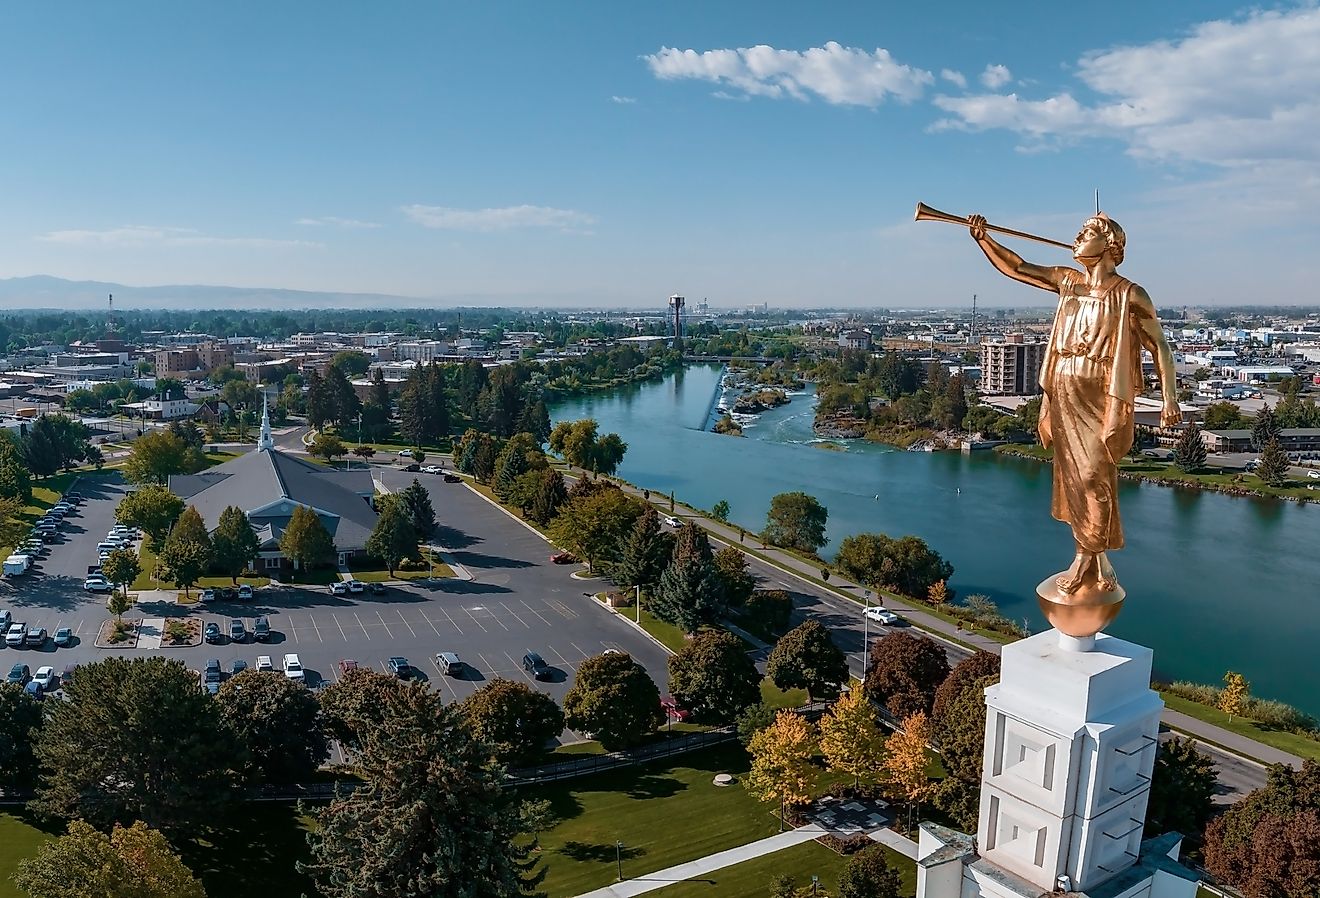 Aerial view of the waterfall in the city of Idaho Falls, Idaho, with a temple in the city center. Image credit RAW-films via Shutterstock